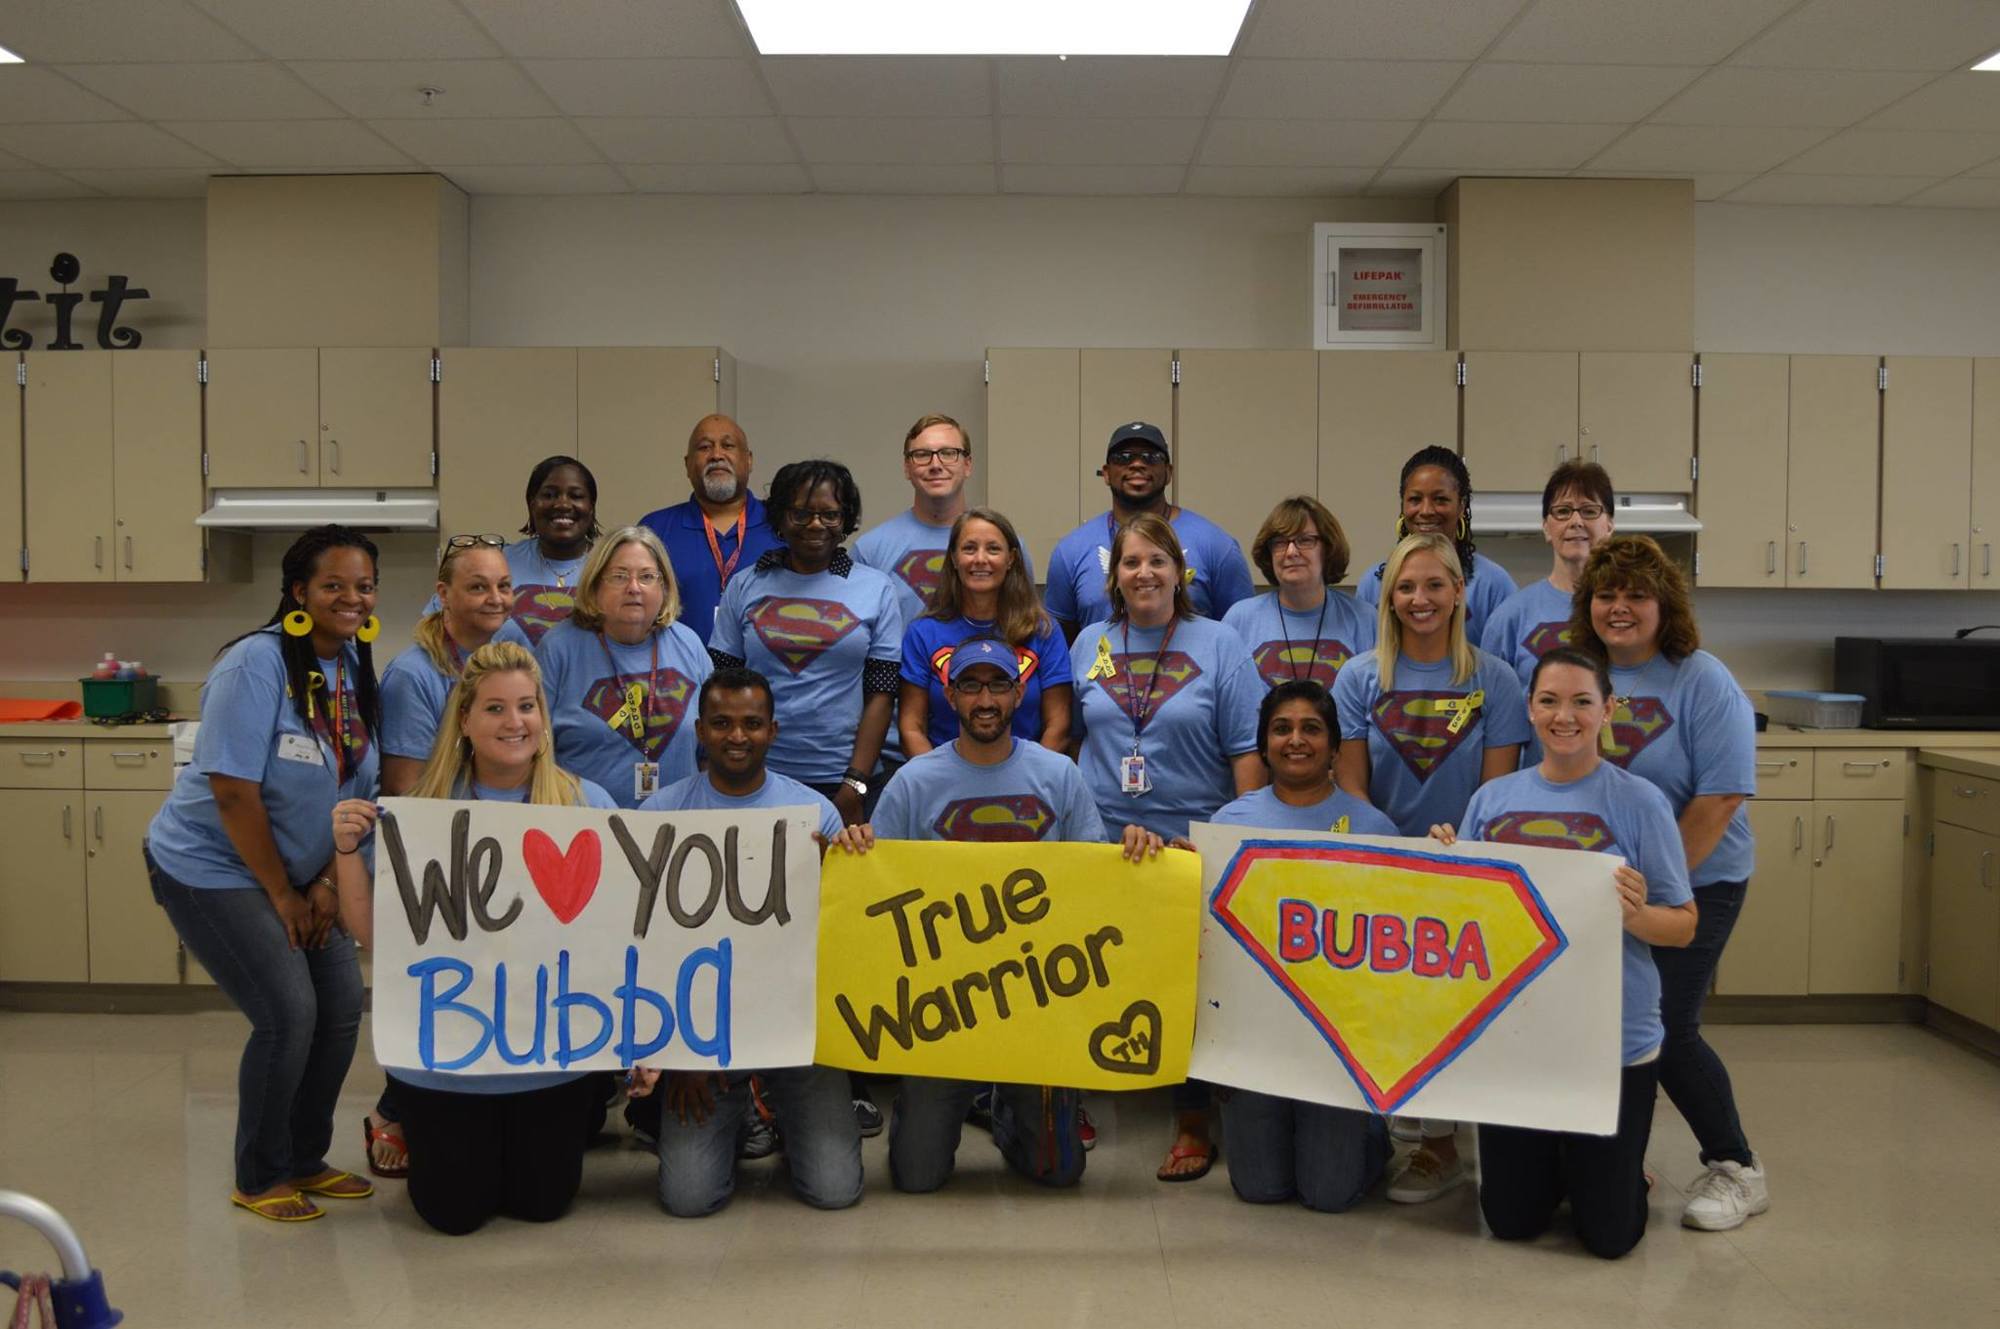 The Exceptional Student Education staff and Principal Doug Szcinski donned blue Superman T-shirts in memory of Travjuan “Bubba” Hunter, who died Aug. 21, 2015, of pneumonia.